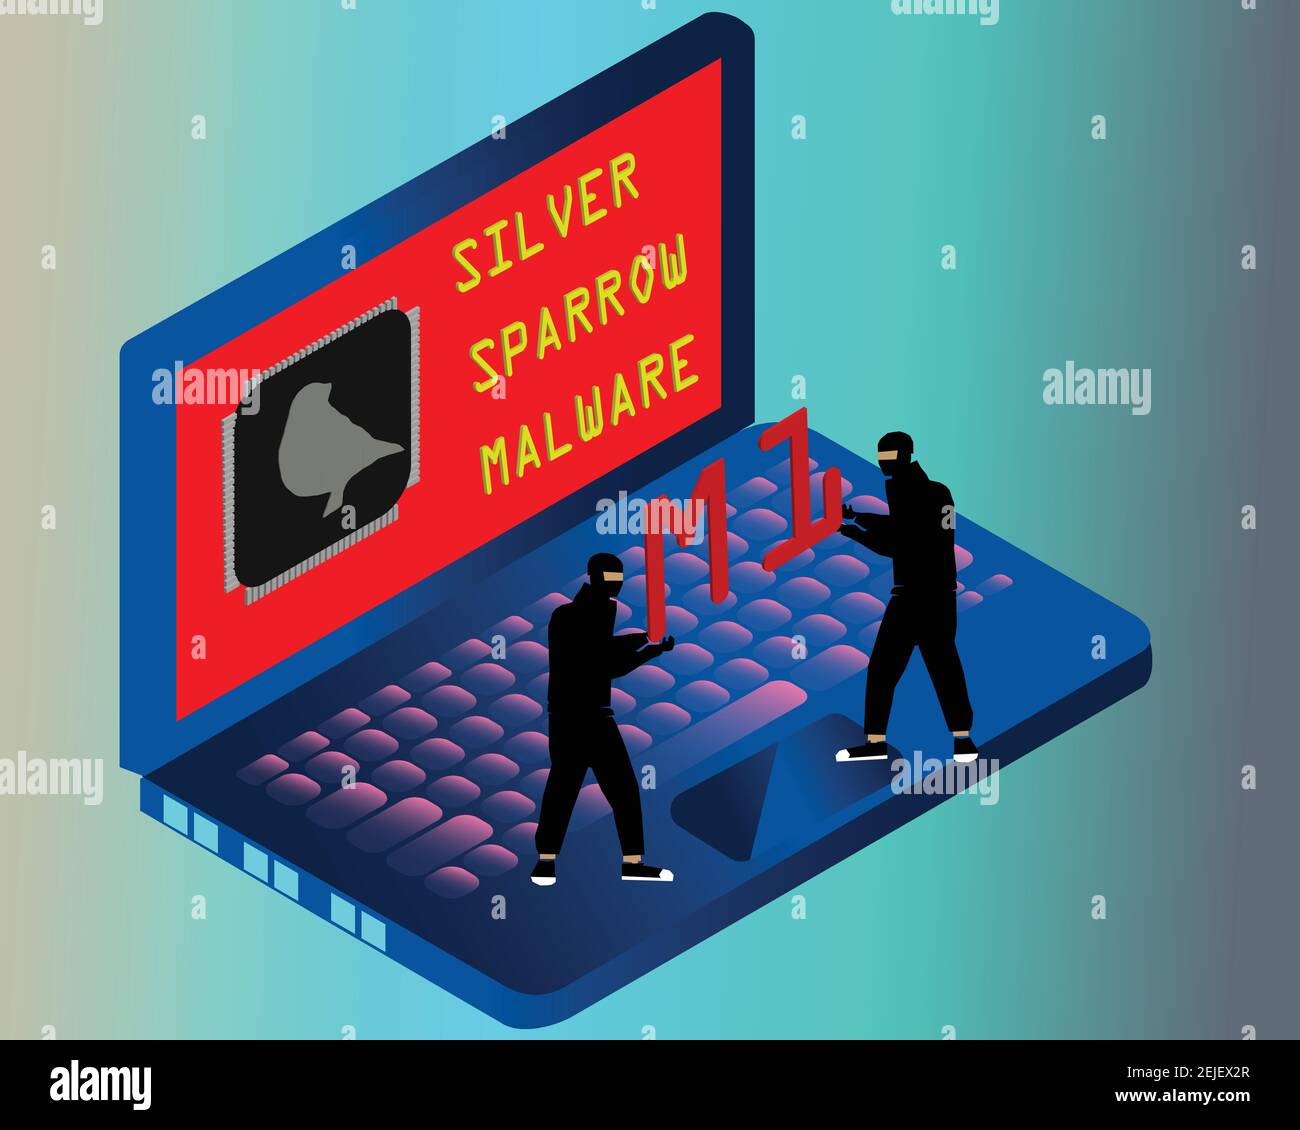 The malware named 'Silver Sparrow' comes with a mechanism to self-destruct itself, a capability that's typically reserved for high-stealth operations. Stock Vector